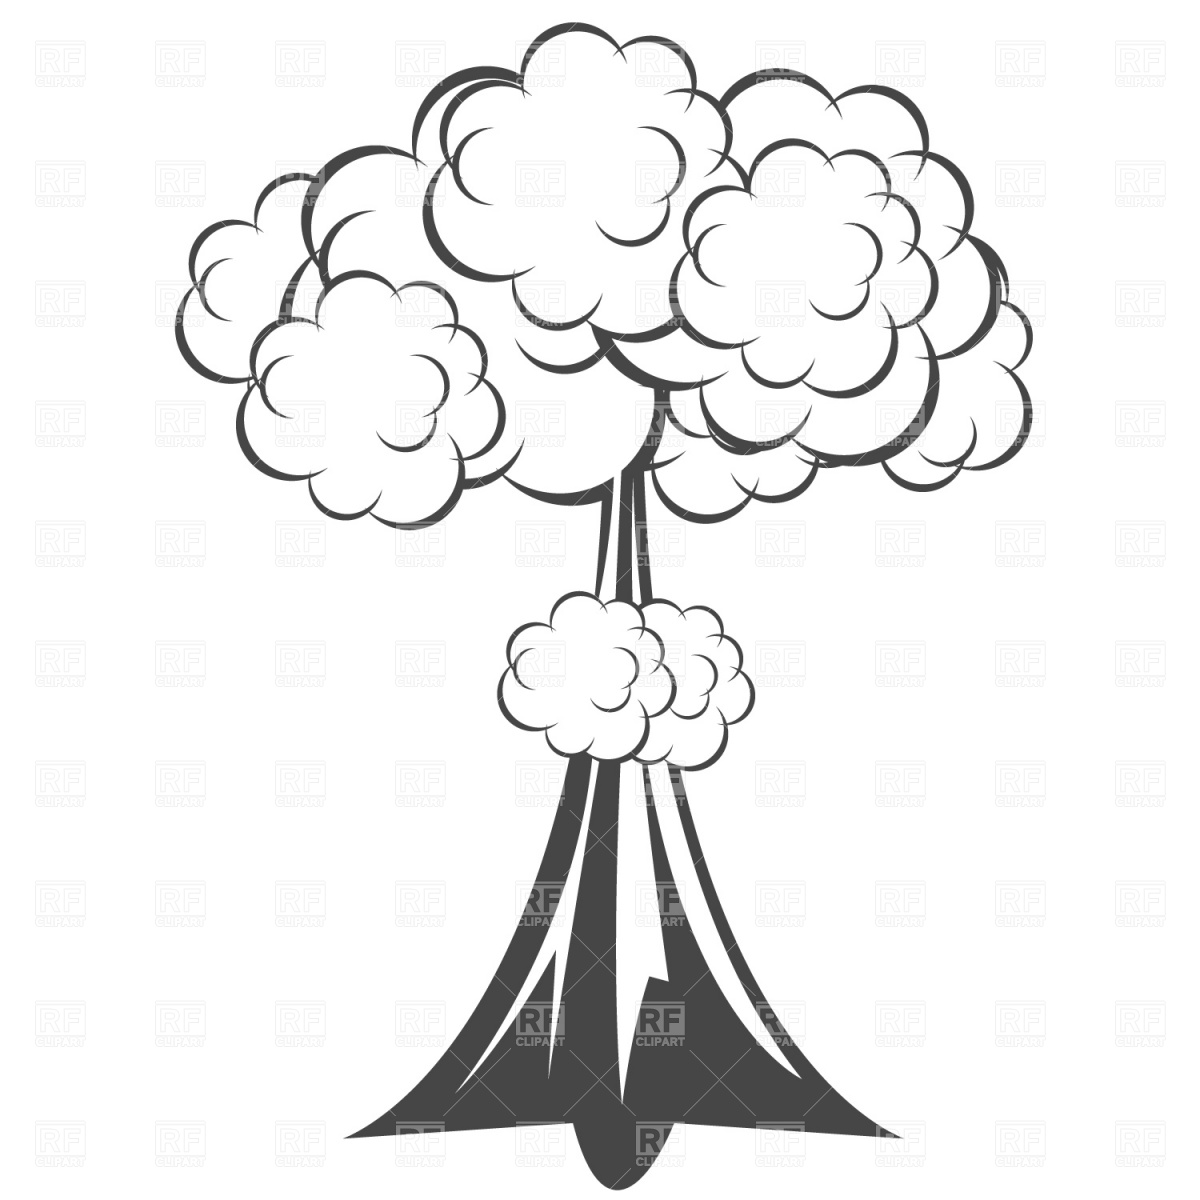 With Mushroom Cloud 883 Download Royalty Free Vector Clipart  Eps